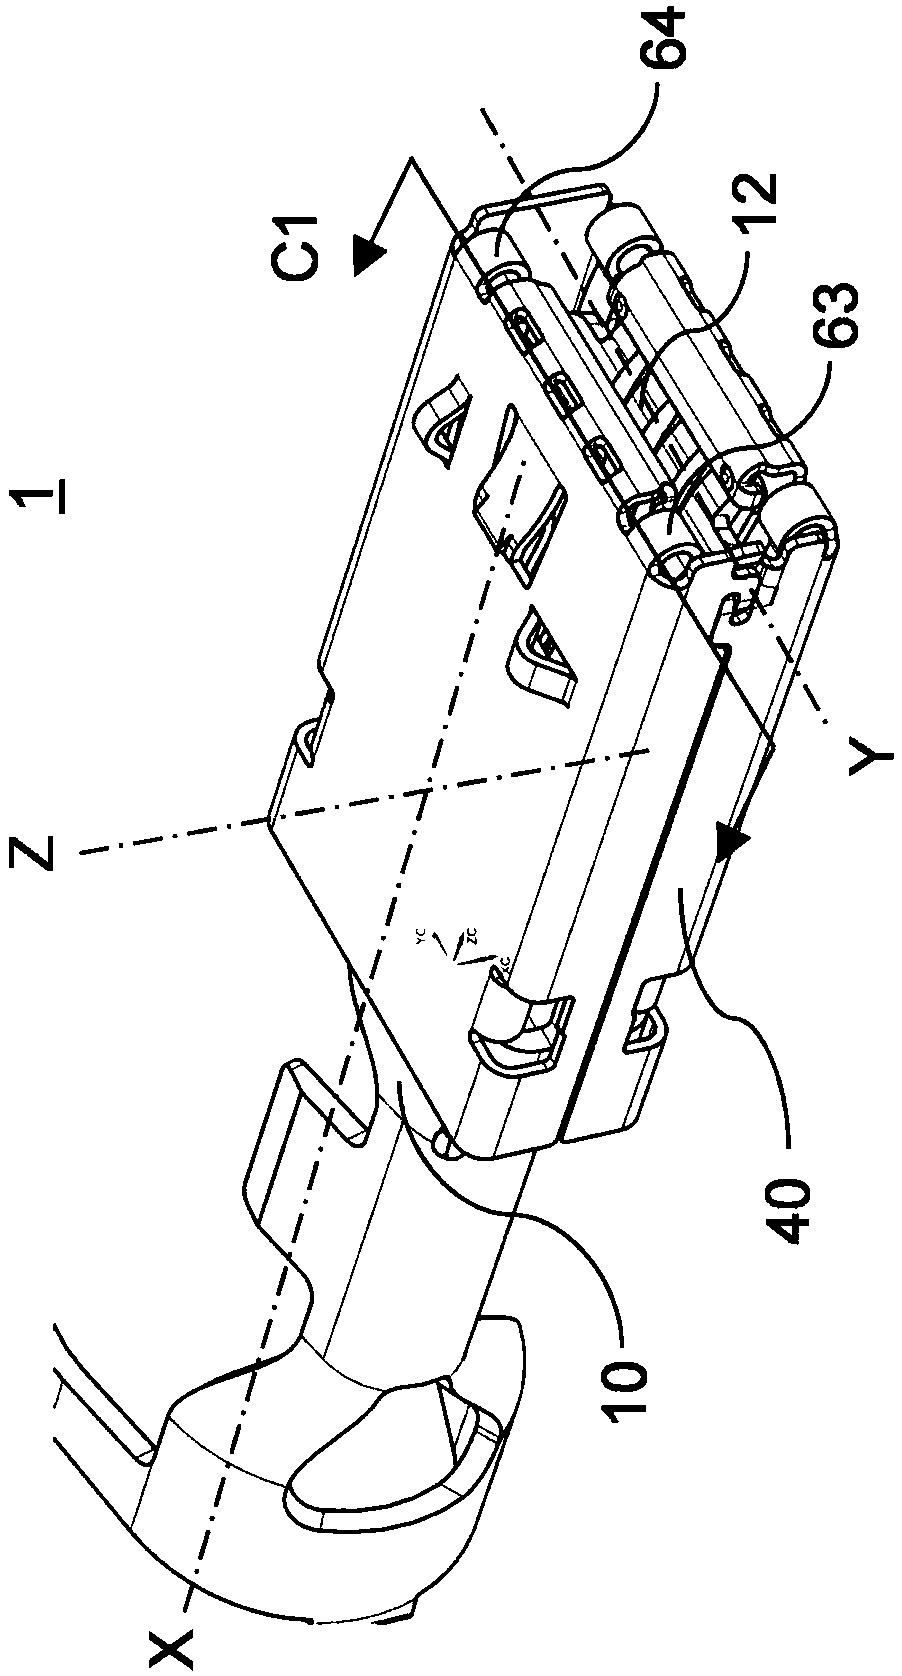 Contact terminal assembled from at least two parts